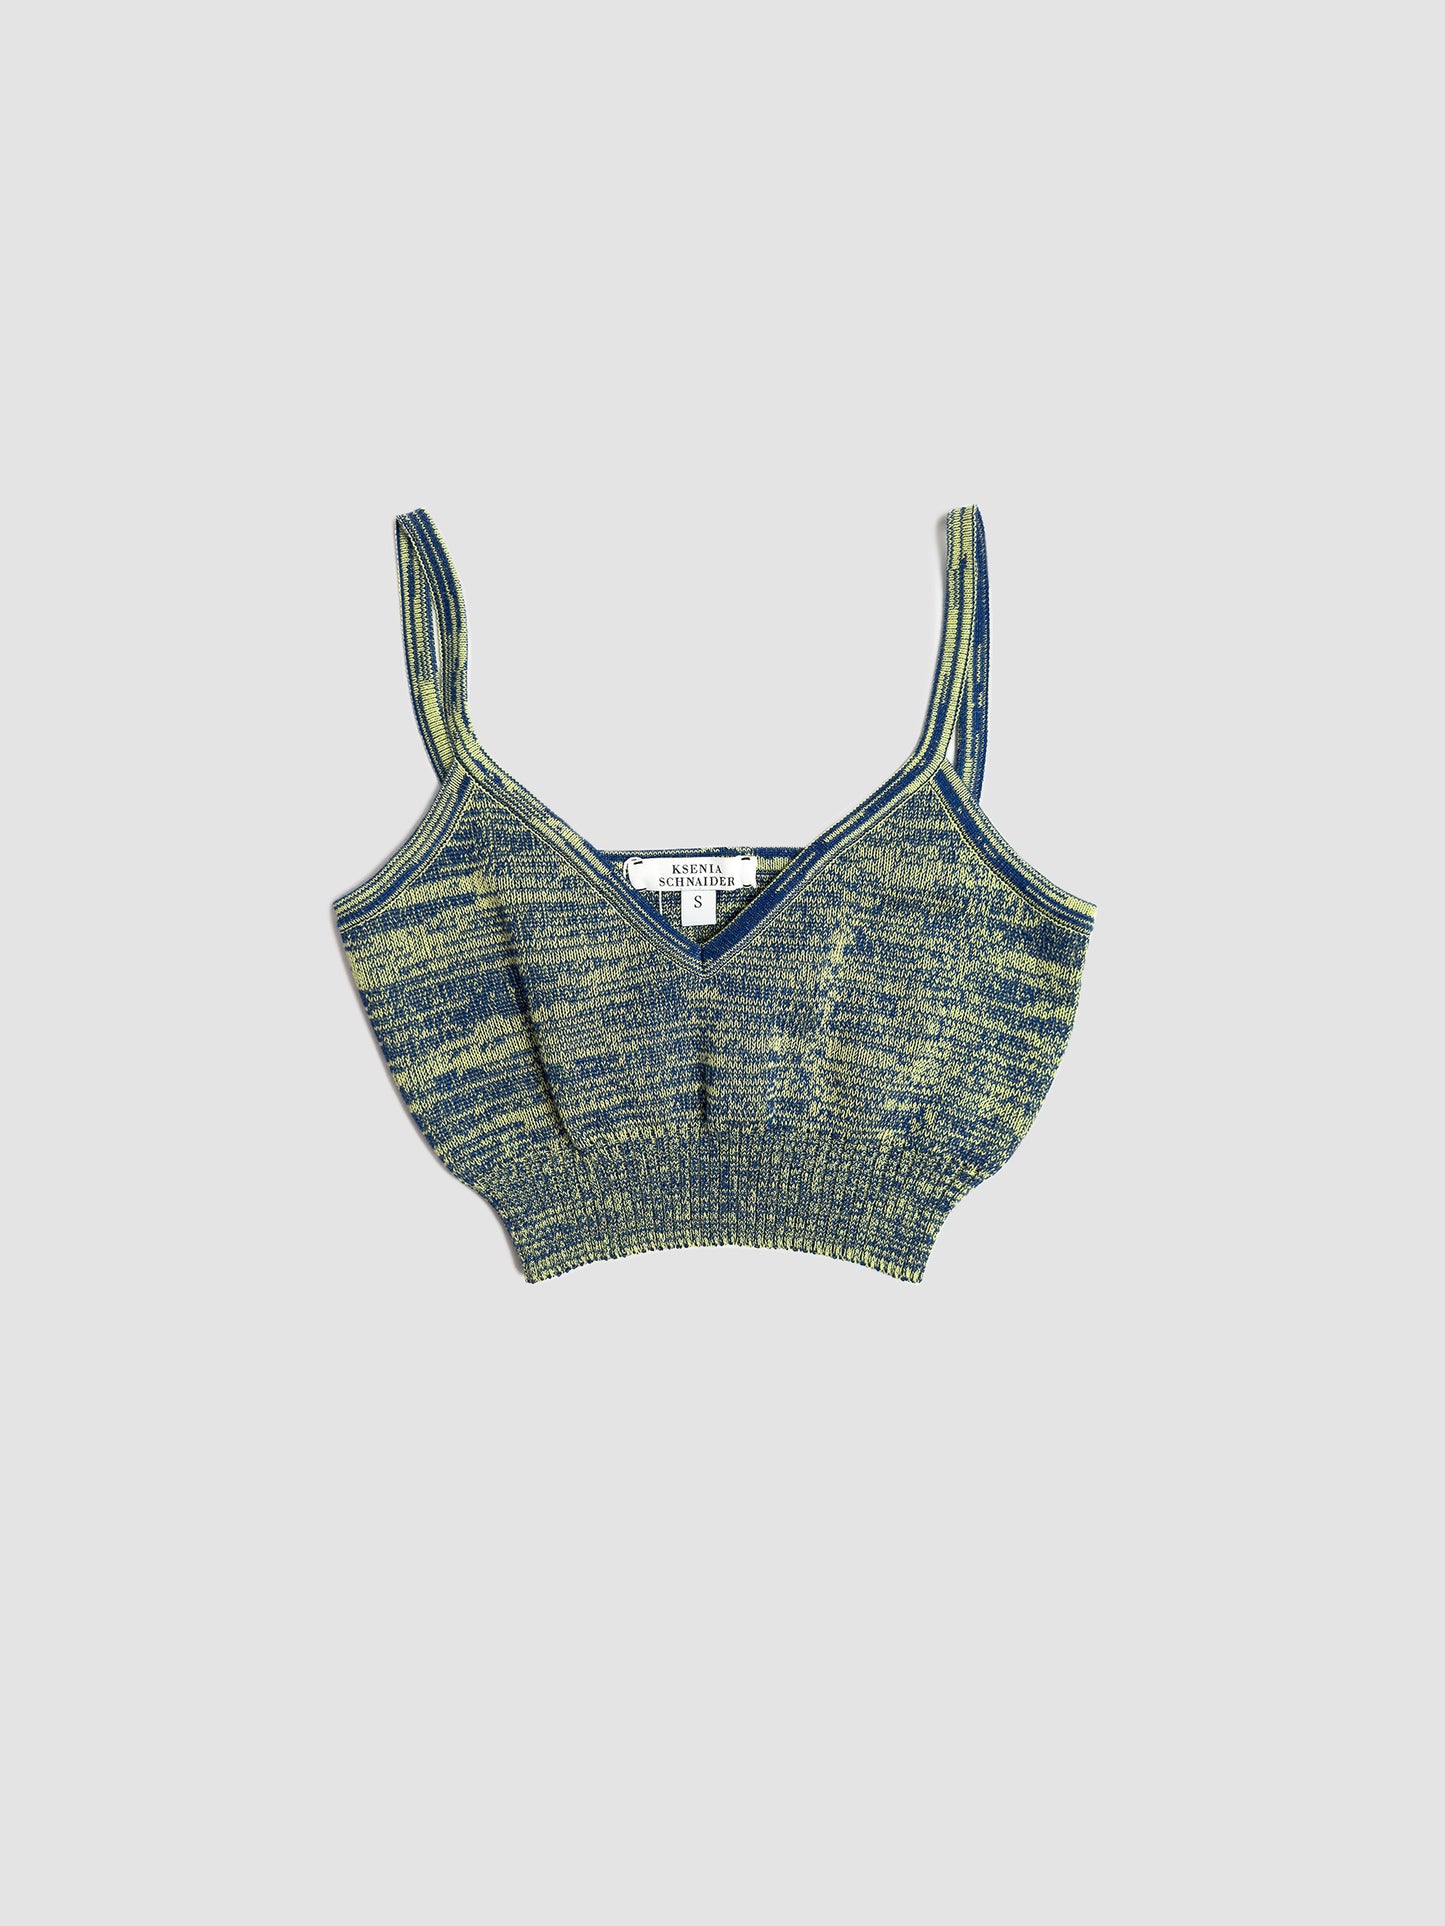 Knitted Bra Top Blue & Yellow - Via Store